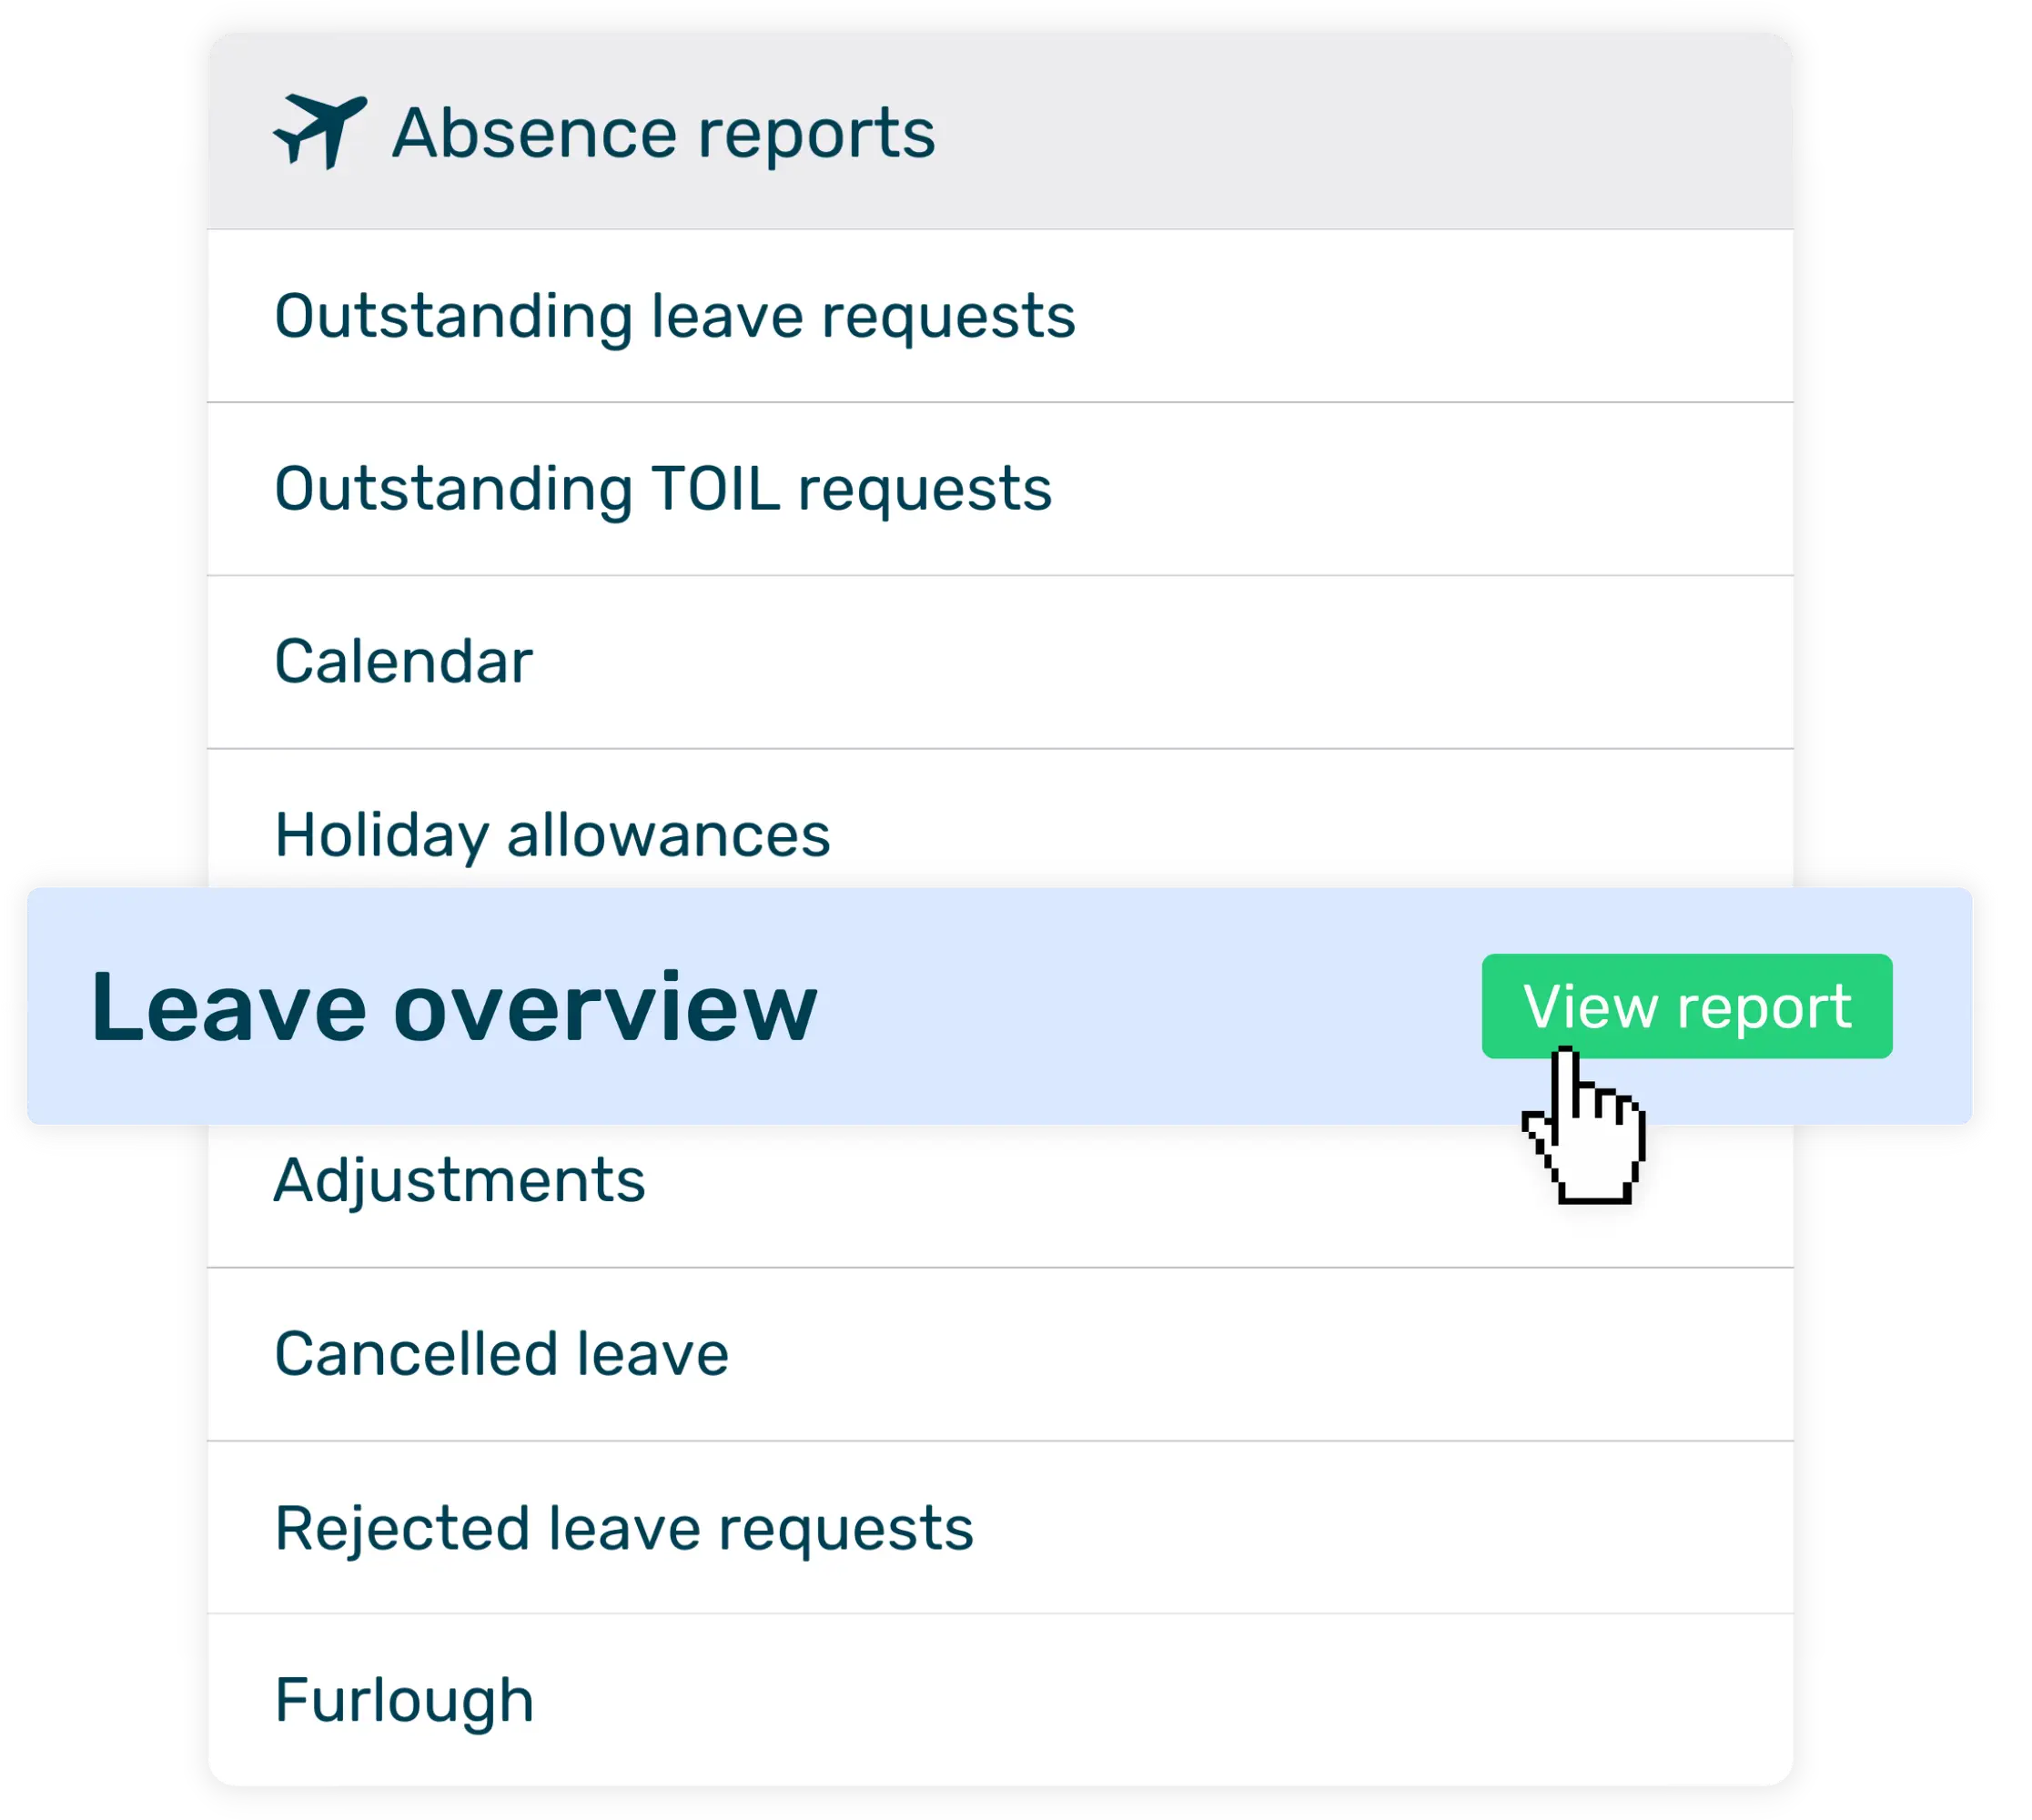 Absence reports